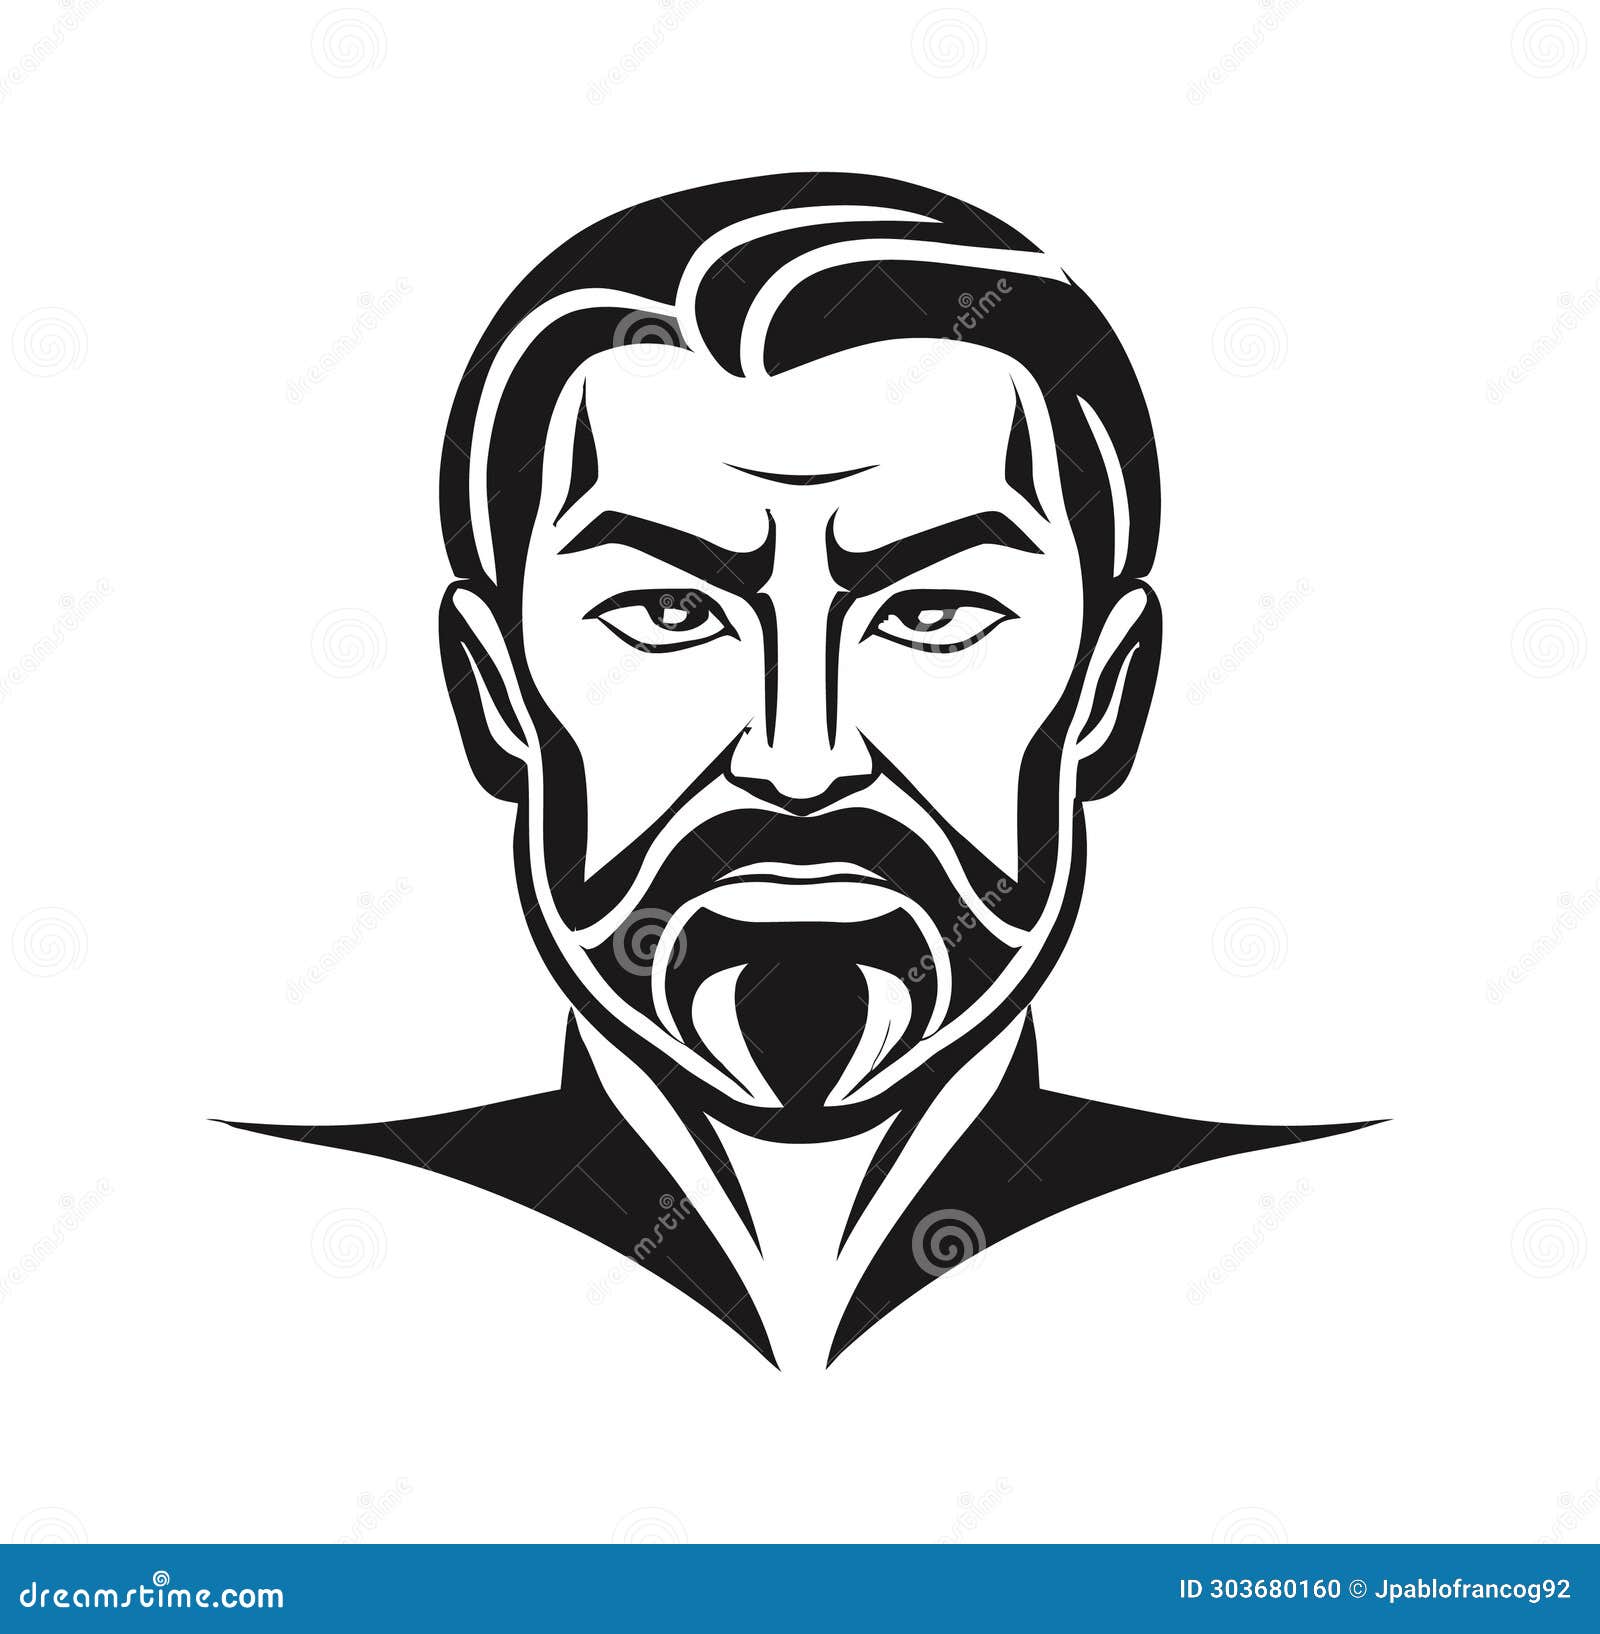 stoic man, flat drawing in simple lines for graphic use in branding